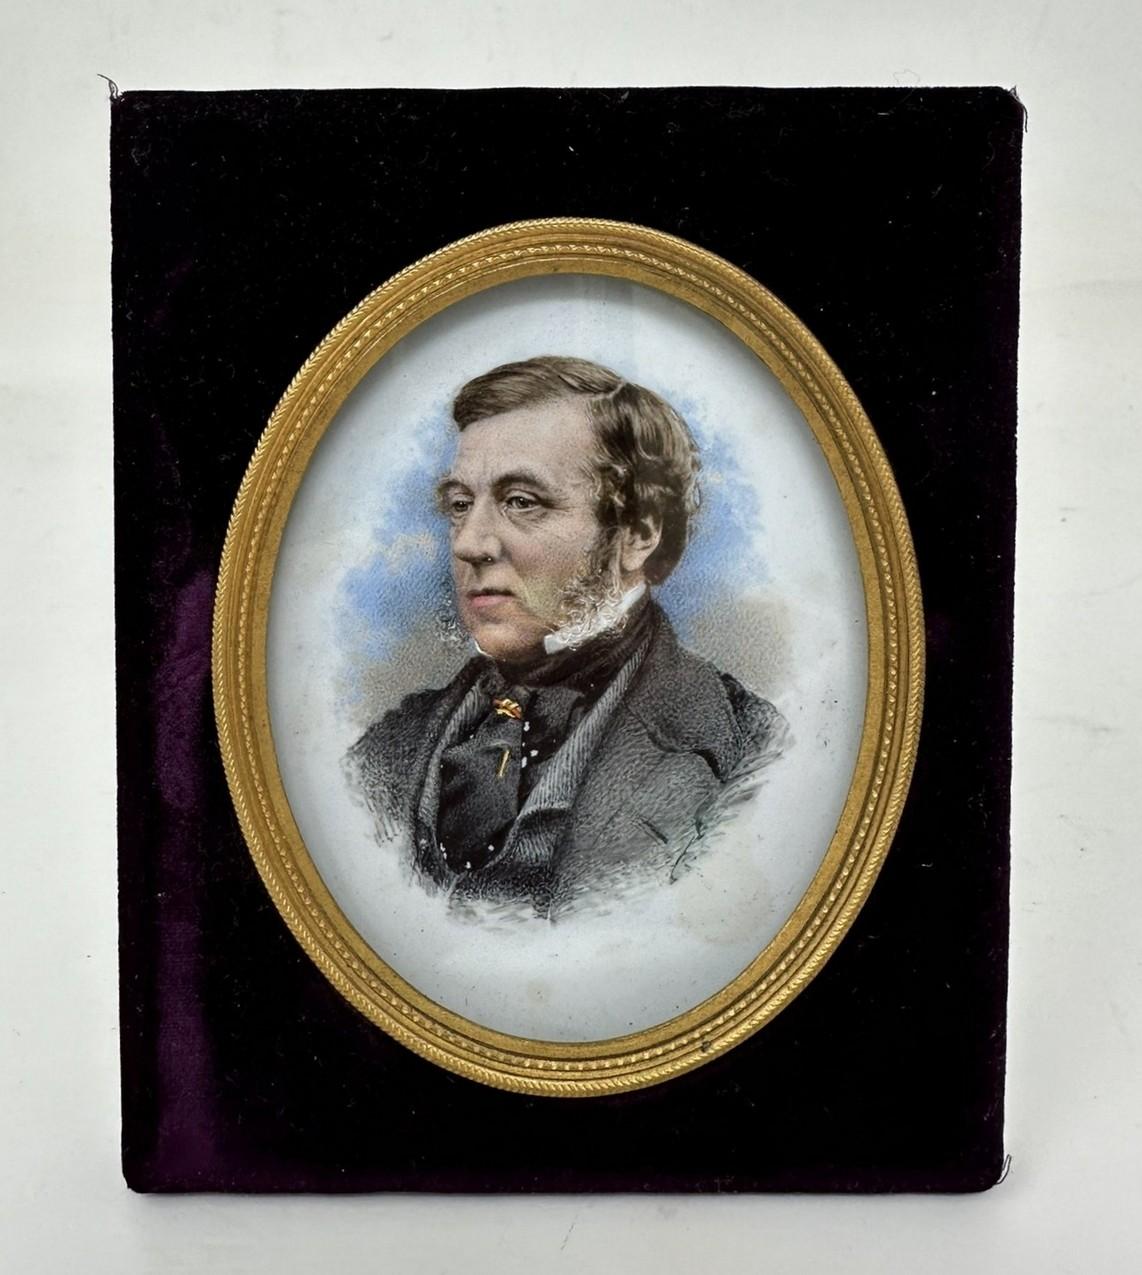 Stunning example of an early rare oval Miniature Portrait Watercolour on paper within a finely chased Ormolu surround by English Artist Arthur James Melhuish (1824-1925) depicts  

Portrait of Thomas Nettleship Staley (1823-1898) a British Bishop of